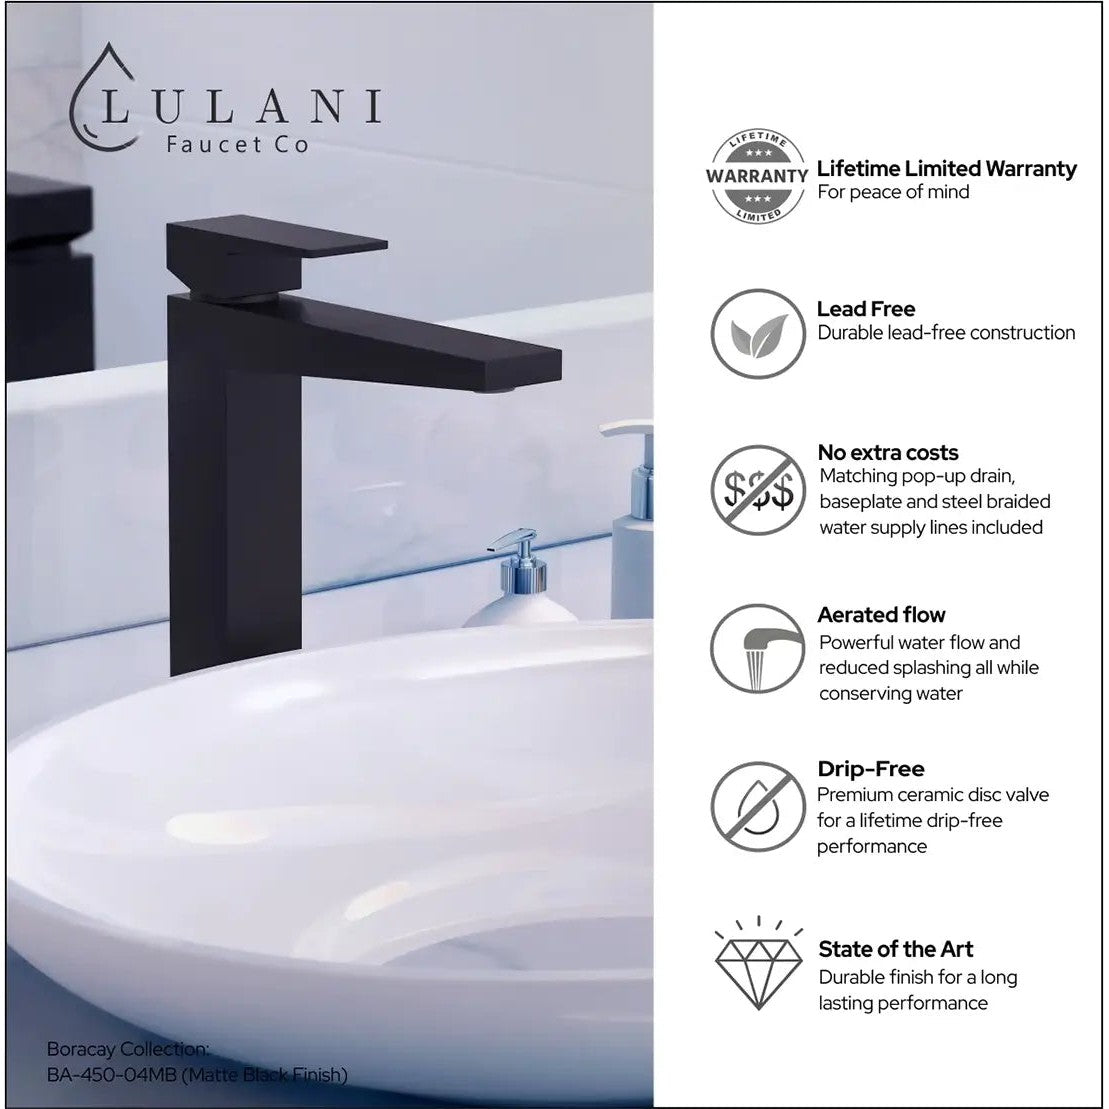 Lulani Boracay Matte Black 1.2 GPM Single Handle Vessel Sink Brass Faucet With Drain Assembly